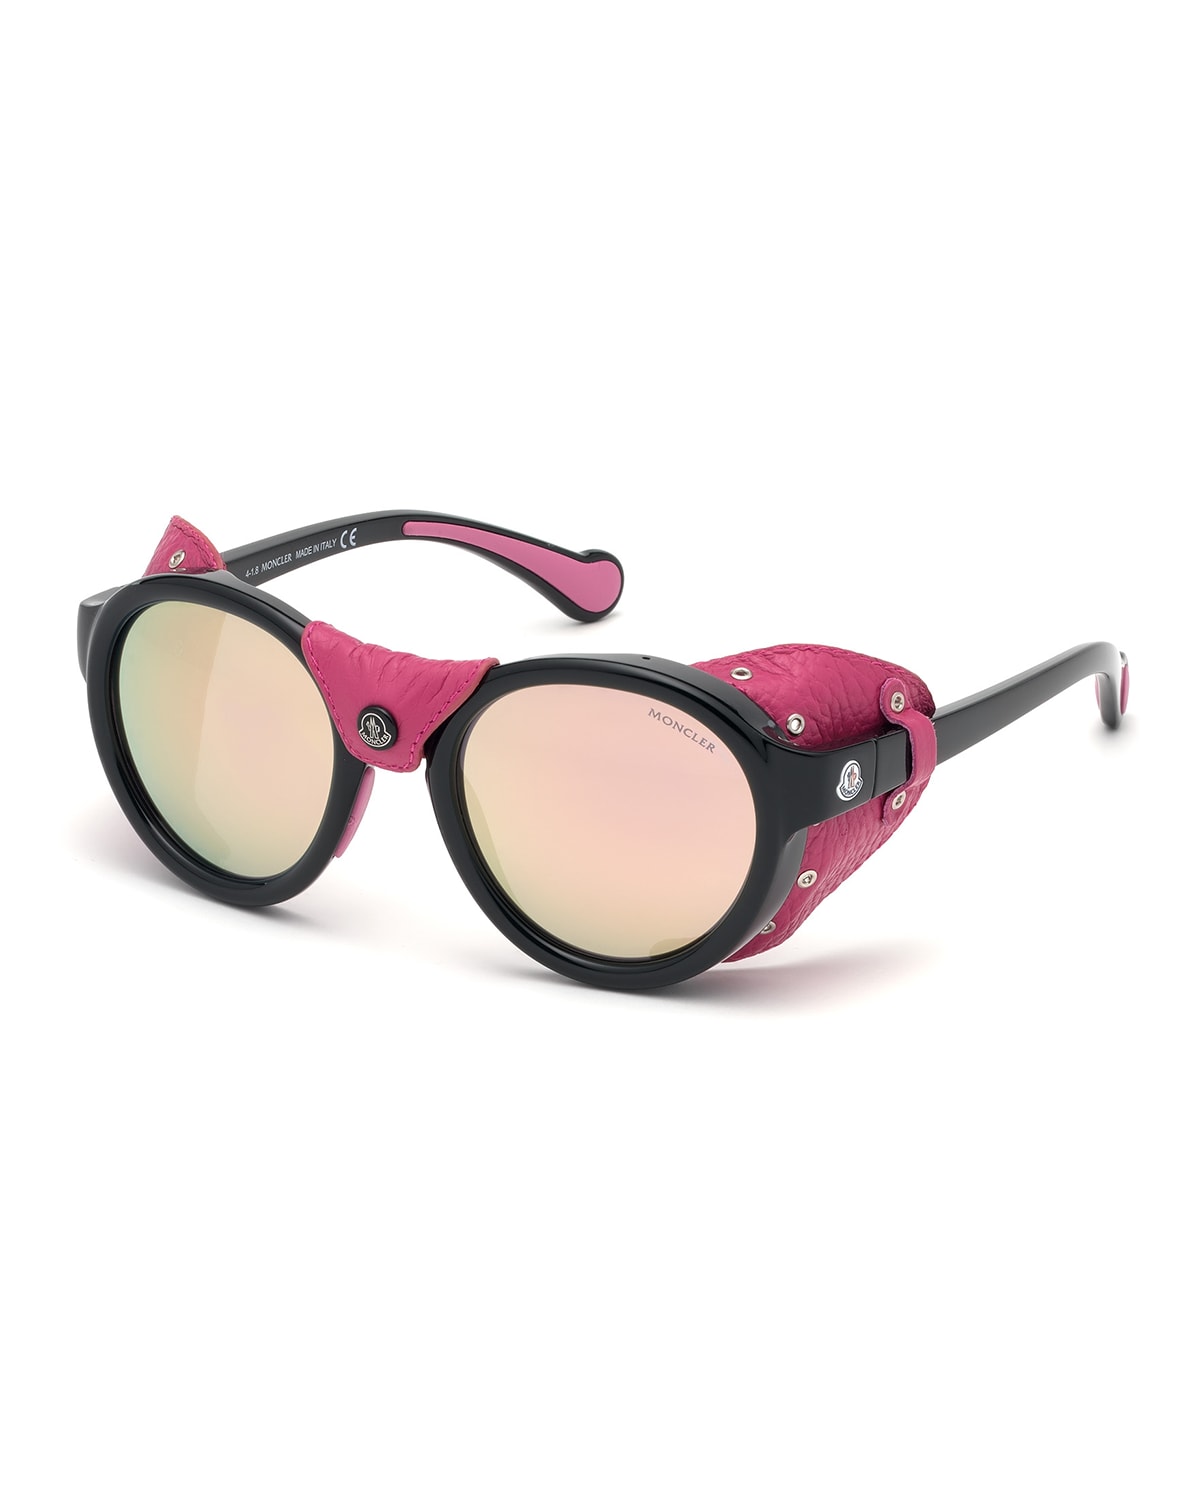 Round Mirrored Sunglasses w/ Metallic Leather Side Blinders